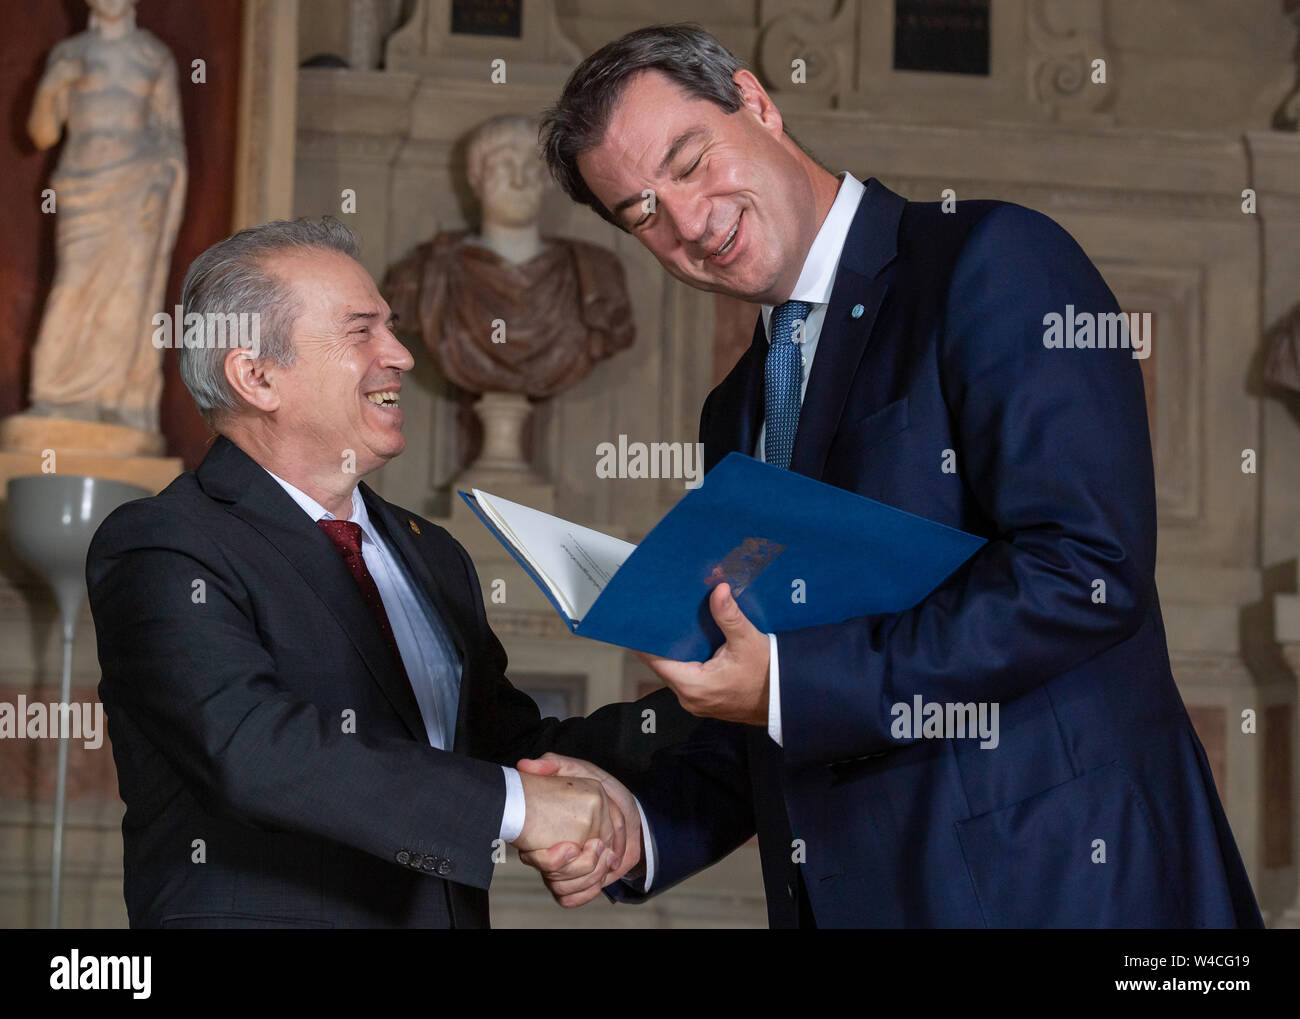 Munich, Germany. 22nd July, 2019. The musician Günther Sigl (l) from Gräfelfing receives the Bavarian Order of Merit from Markus Söder (CSU), Prime Minister of Bavaria. Credit: Peter Kneffel/dpa/Alamy Live News Stock Photo